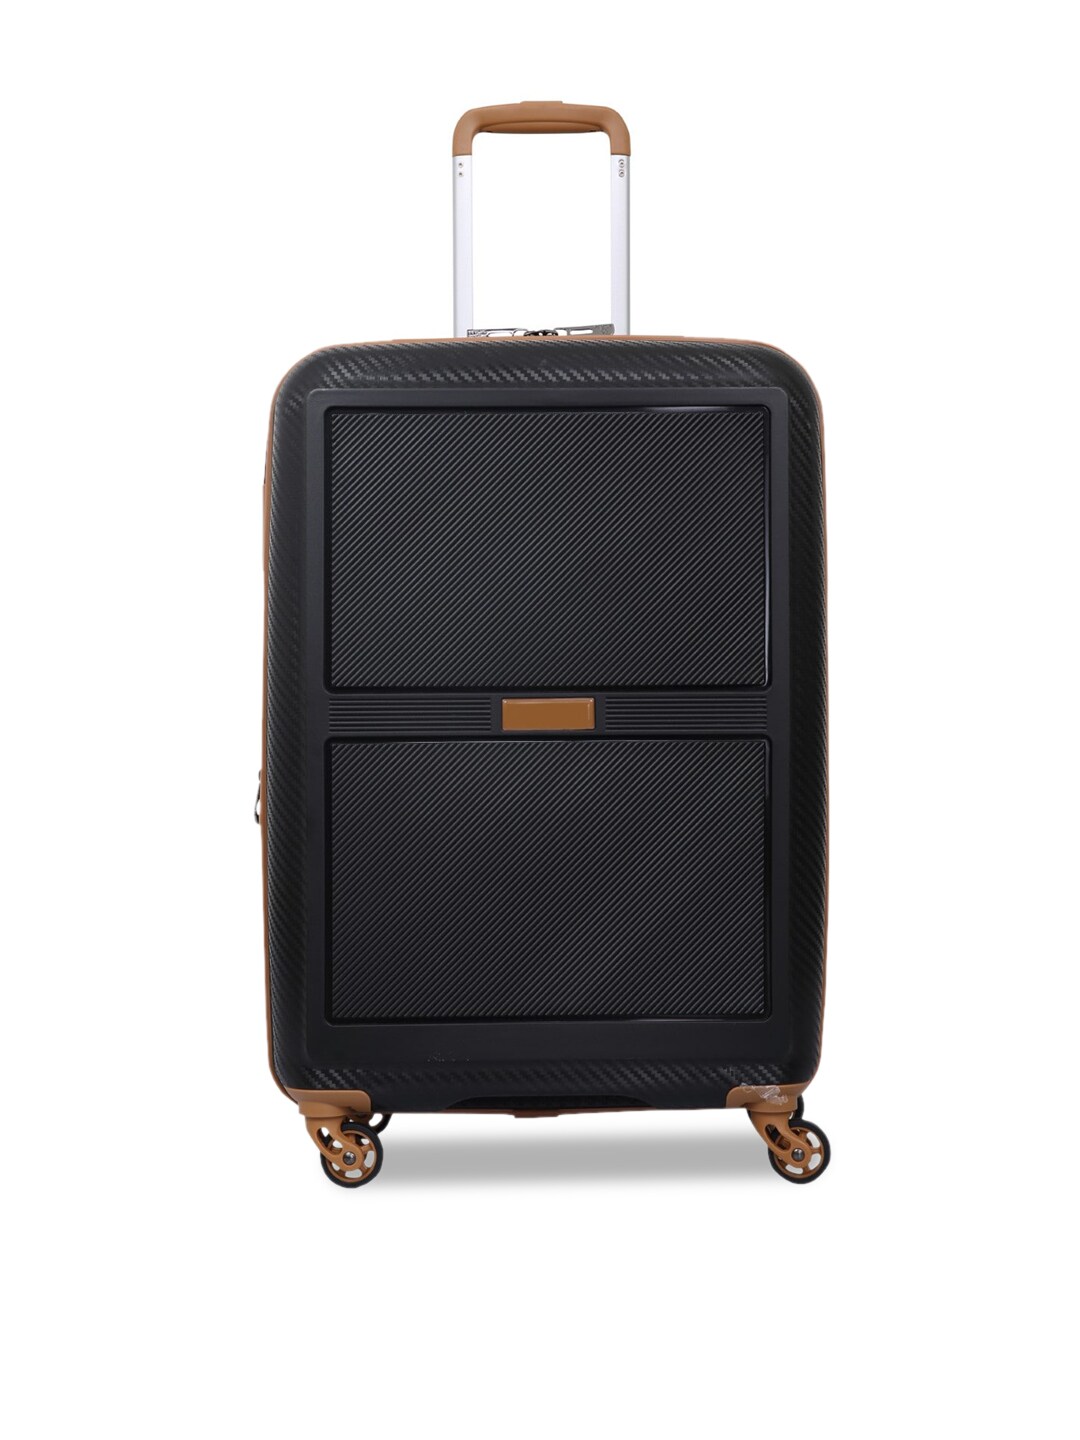 Polo Class Black Scan Trolley Bag Price in India